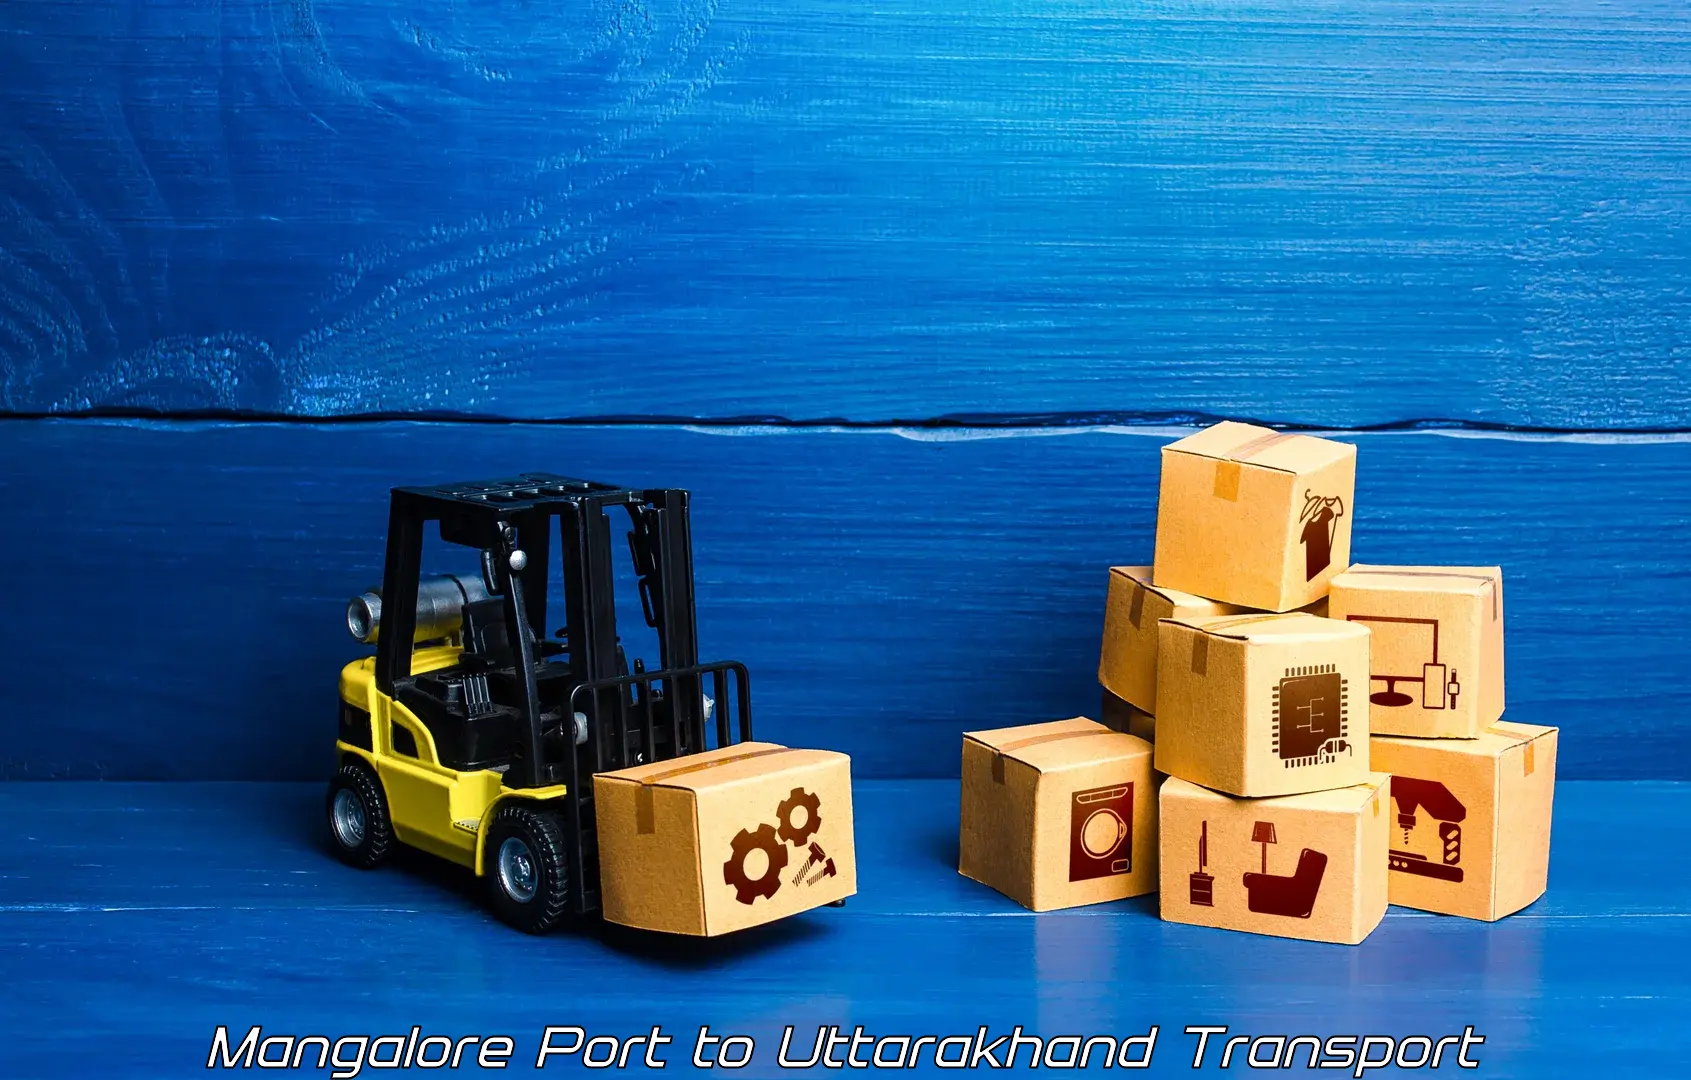 Road transport online services Mangalore Port to IIT Roorkee